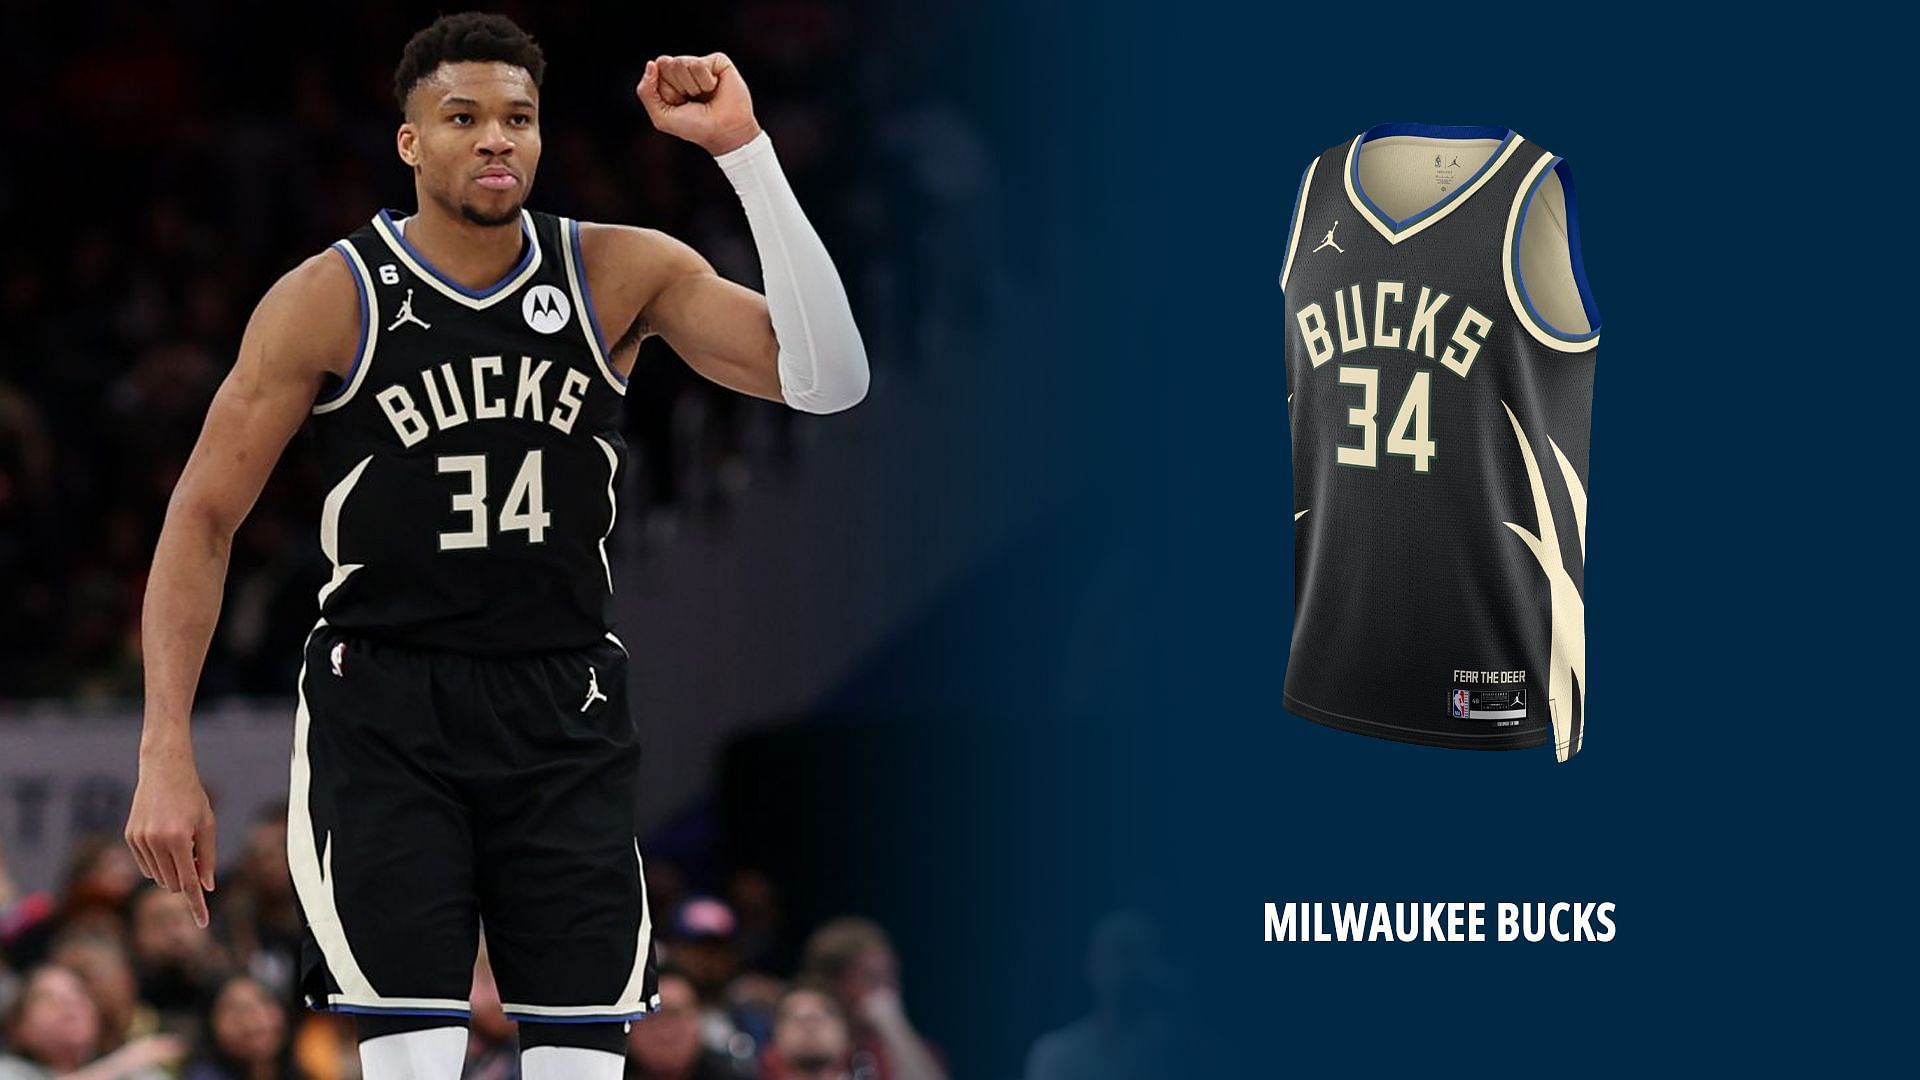 The Bucks currently have fantastic jerseys that look incredible